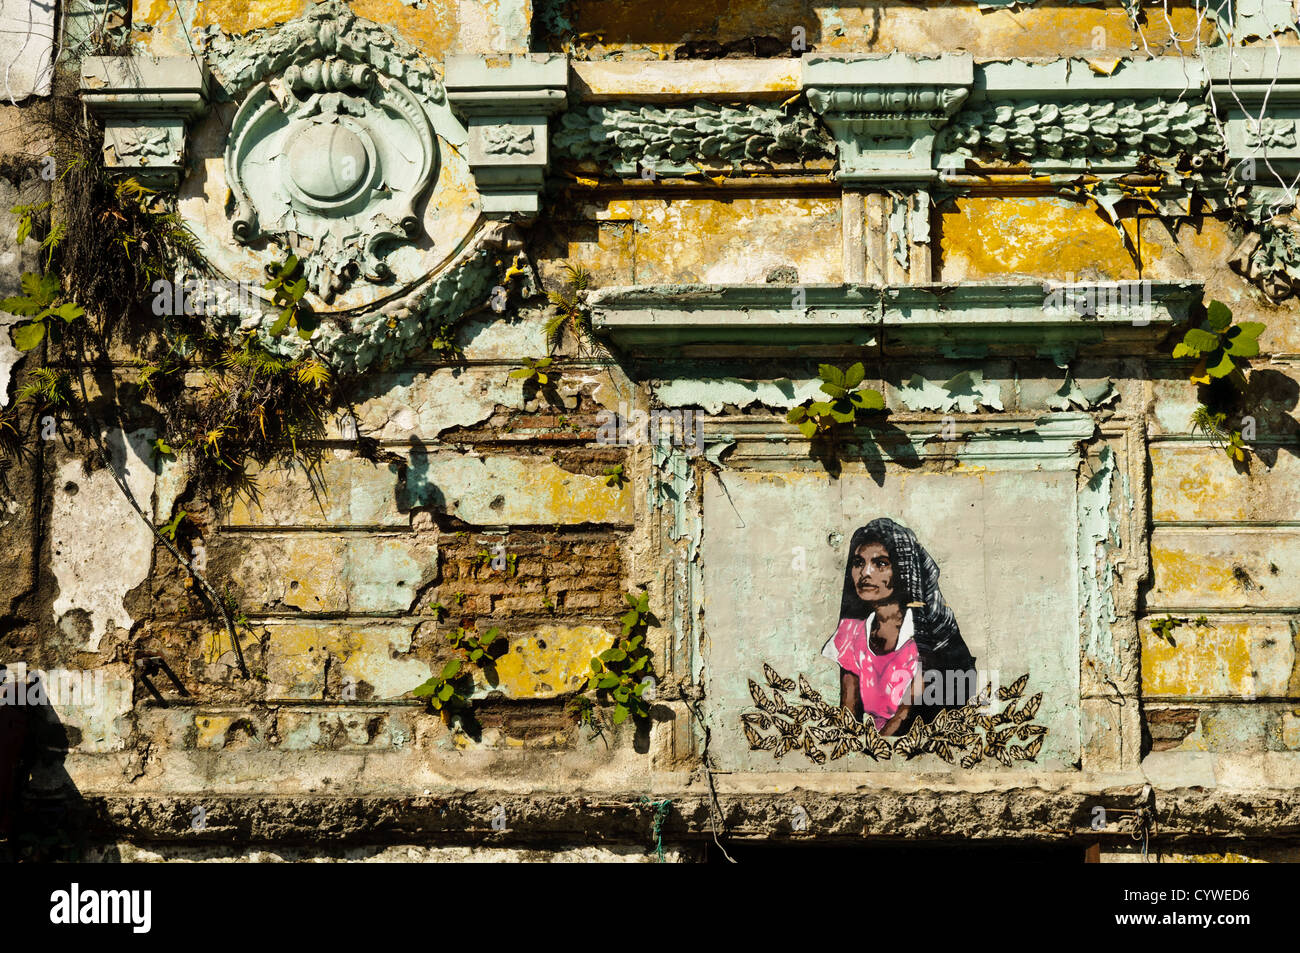 GUATEMALA CITY, Guatemala - Architectural detail of a rundown colonial building with painting of a woman in downtown Guatemala City, Guatemala. Stock Photo